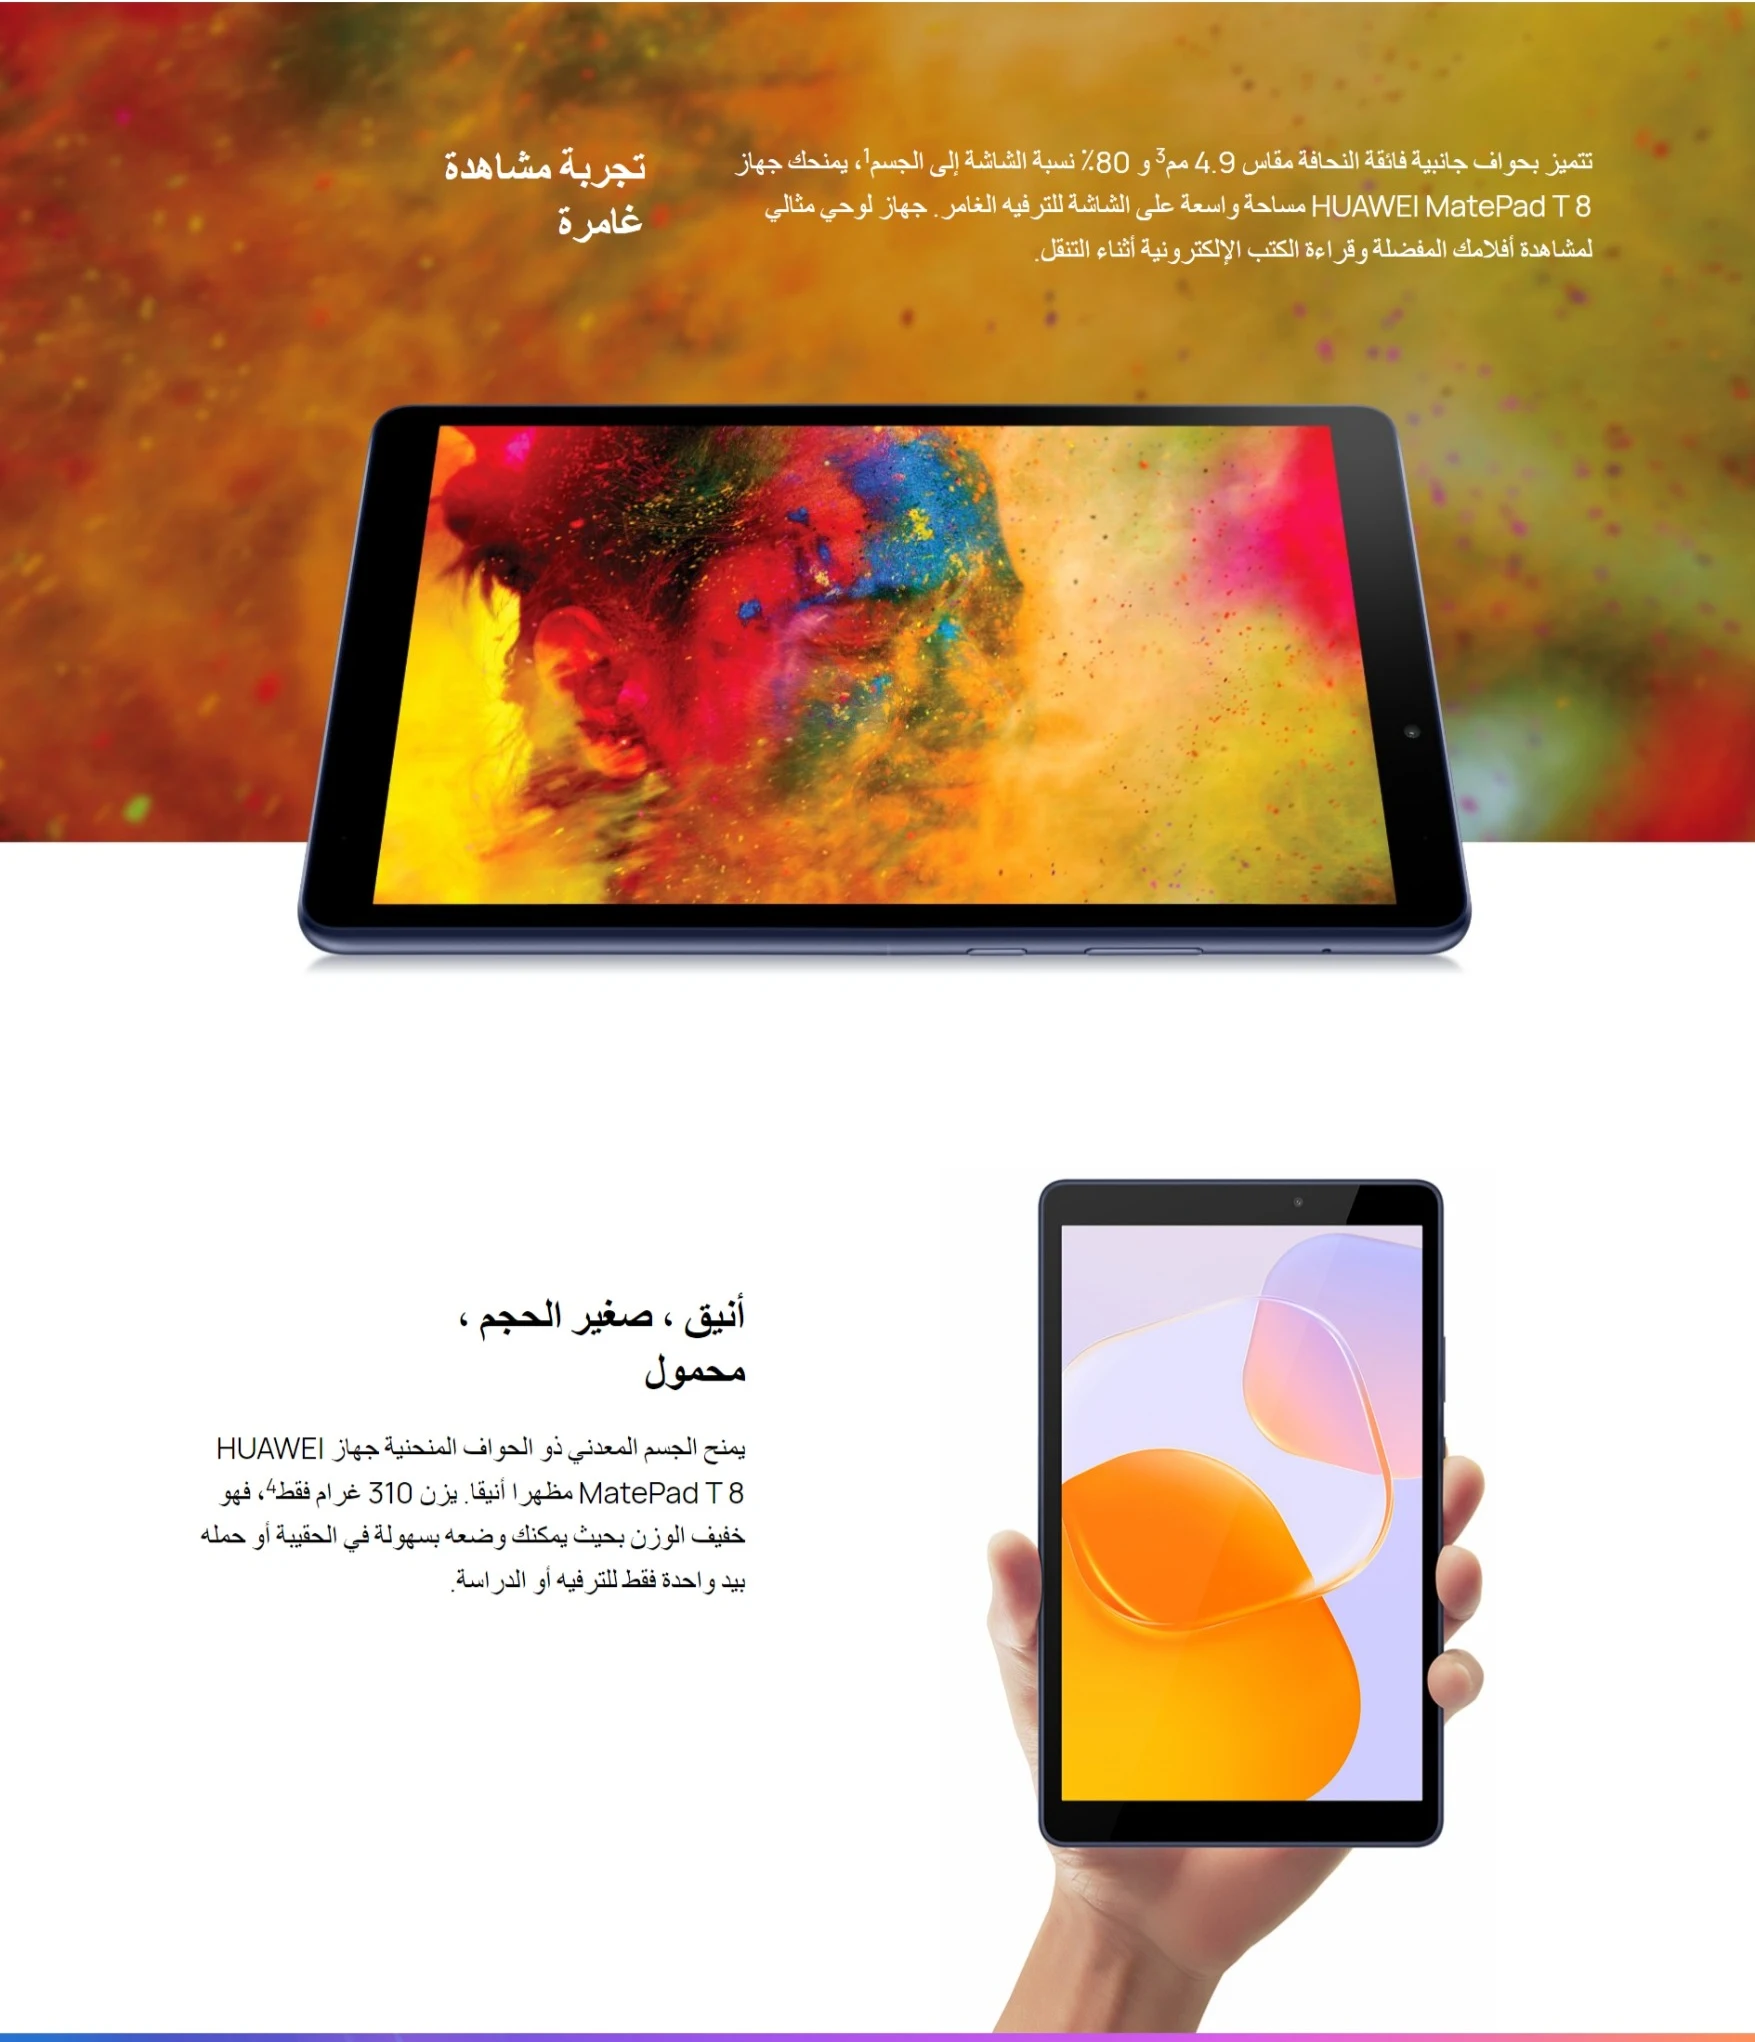 HUAWEI Mate Pad T8 Tablet -ar1